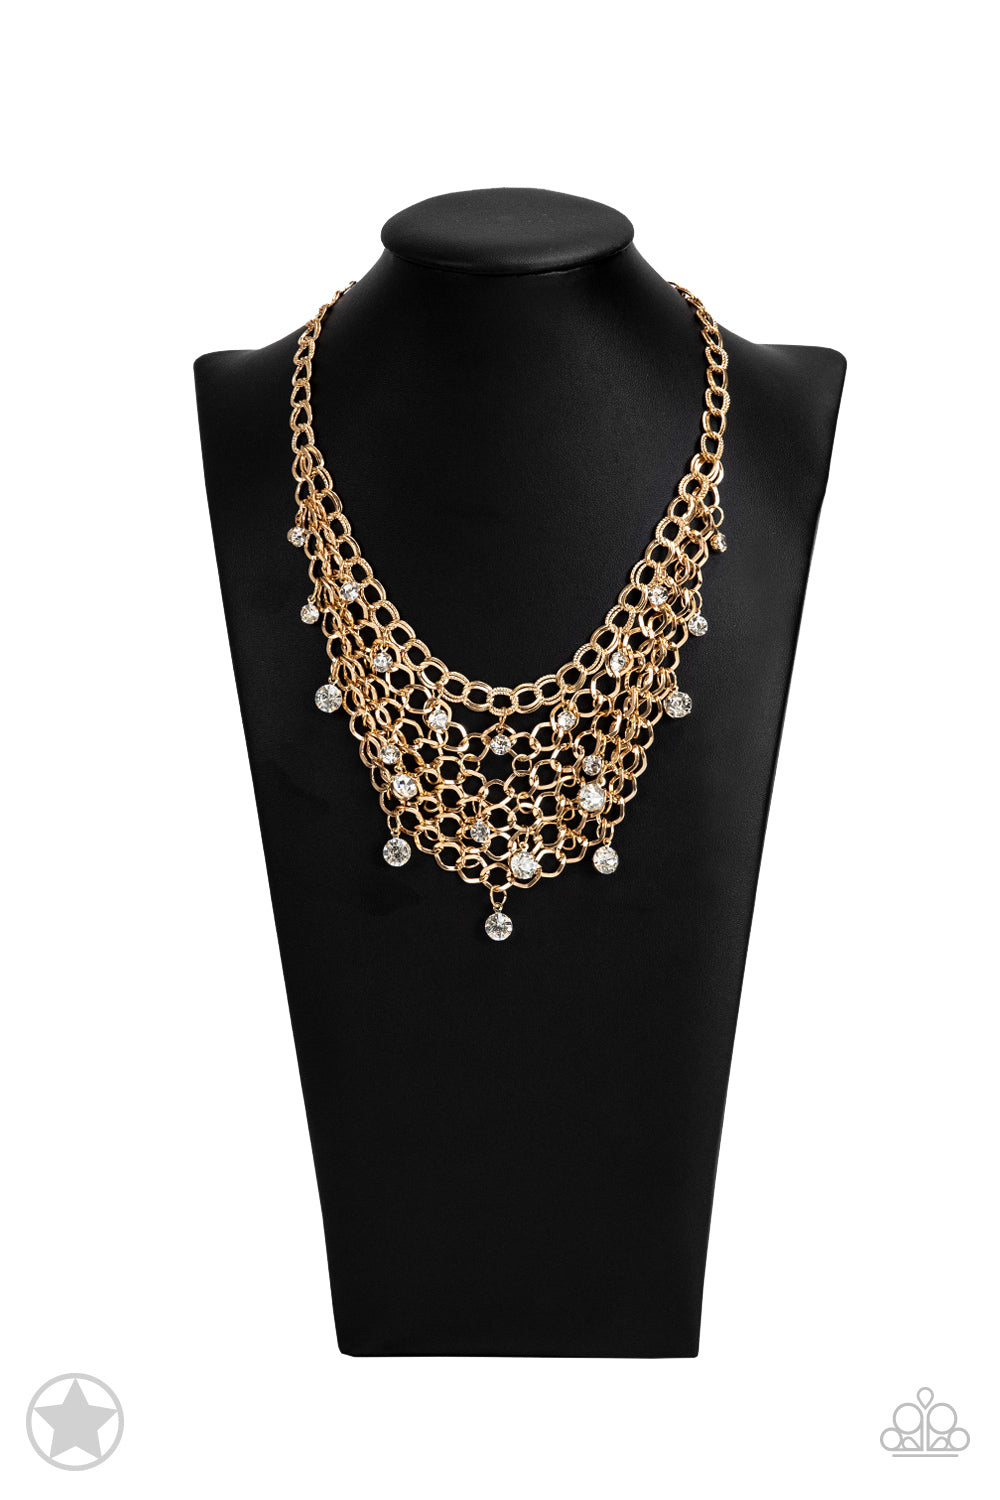 Paparazzi Fishing For Compliments Gold Short Blockbuster Necklace